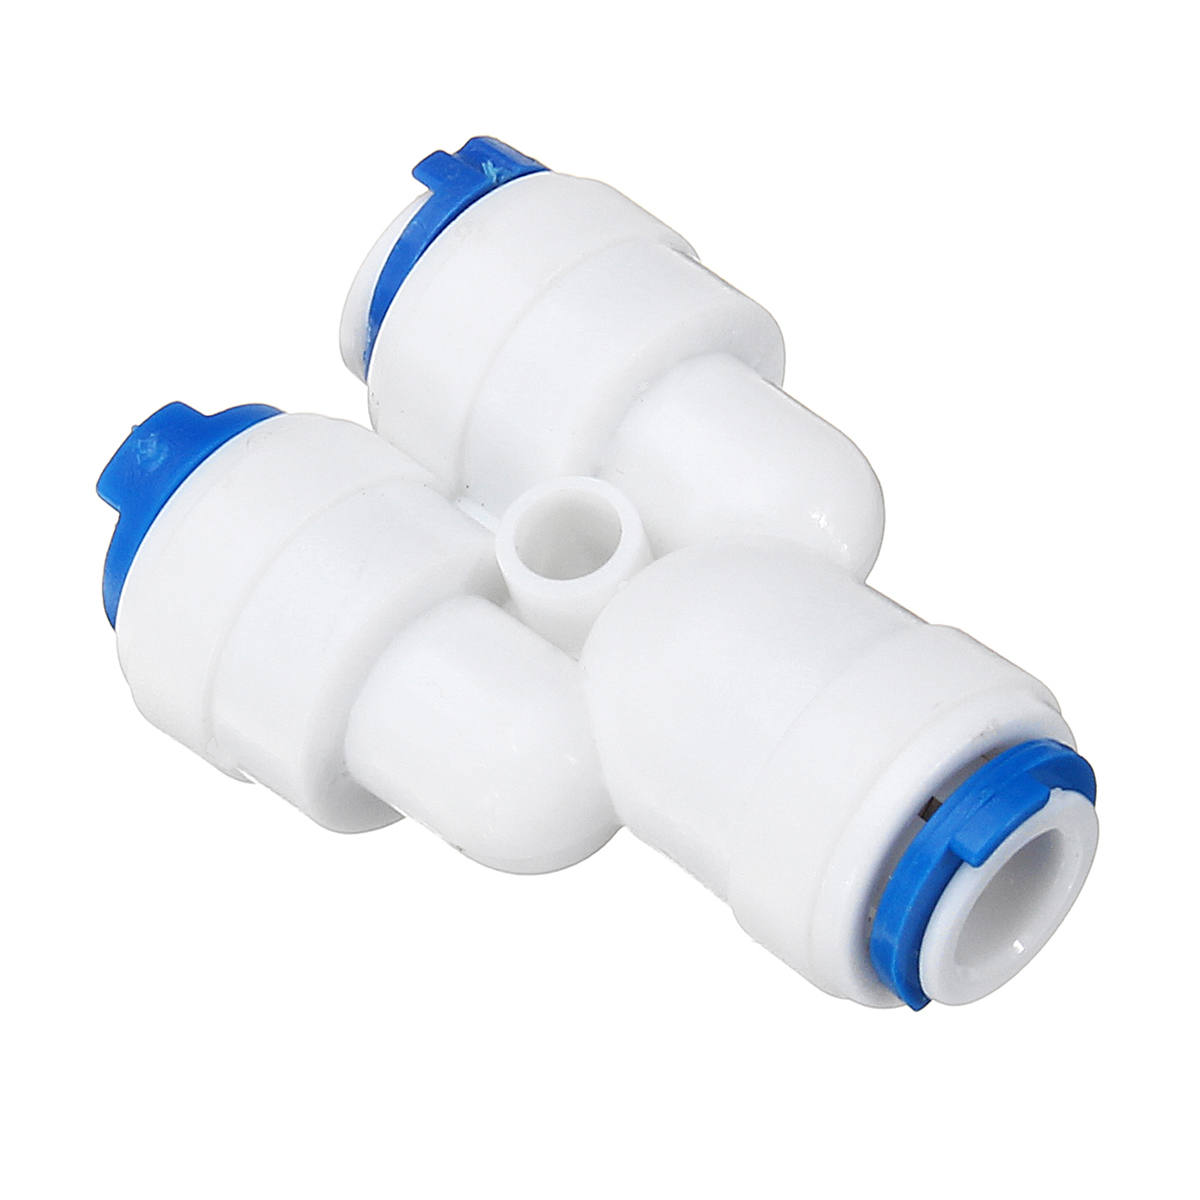 14-Inch-RO-Grade-Y-Type-Water-Tube-Quick-Connect-Parts-Fittings-Connection-Pipes-for-Water-Filters-1378010